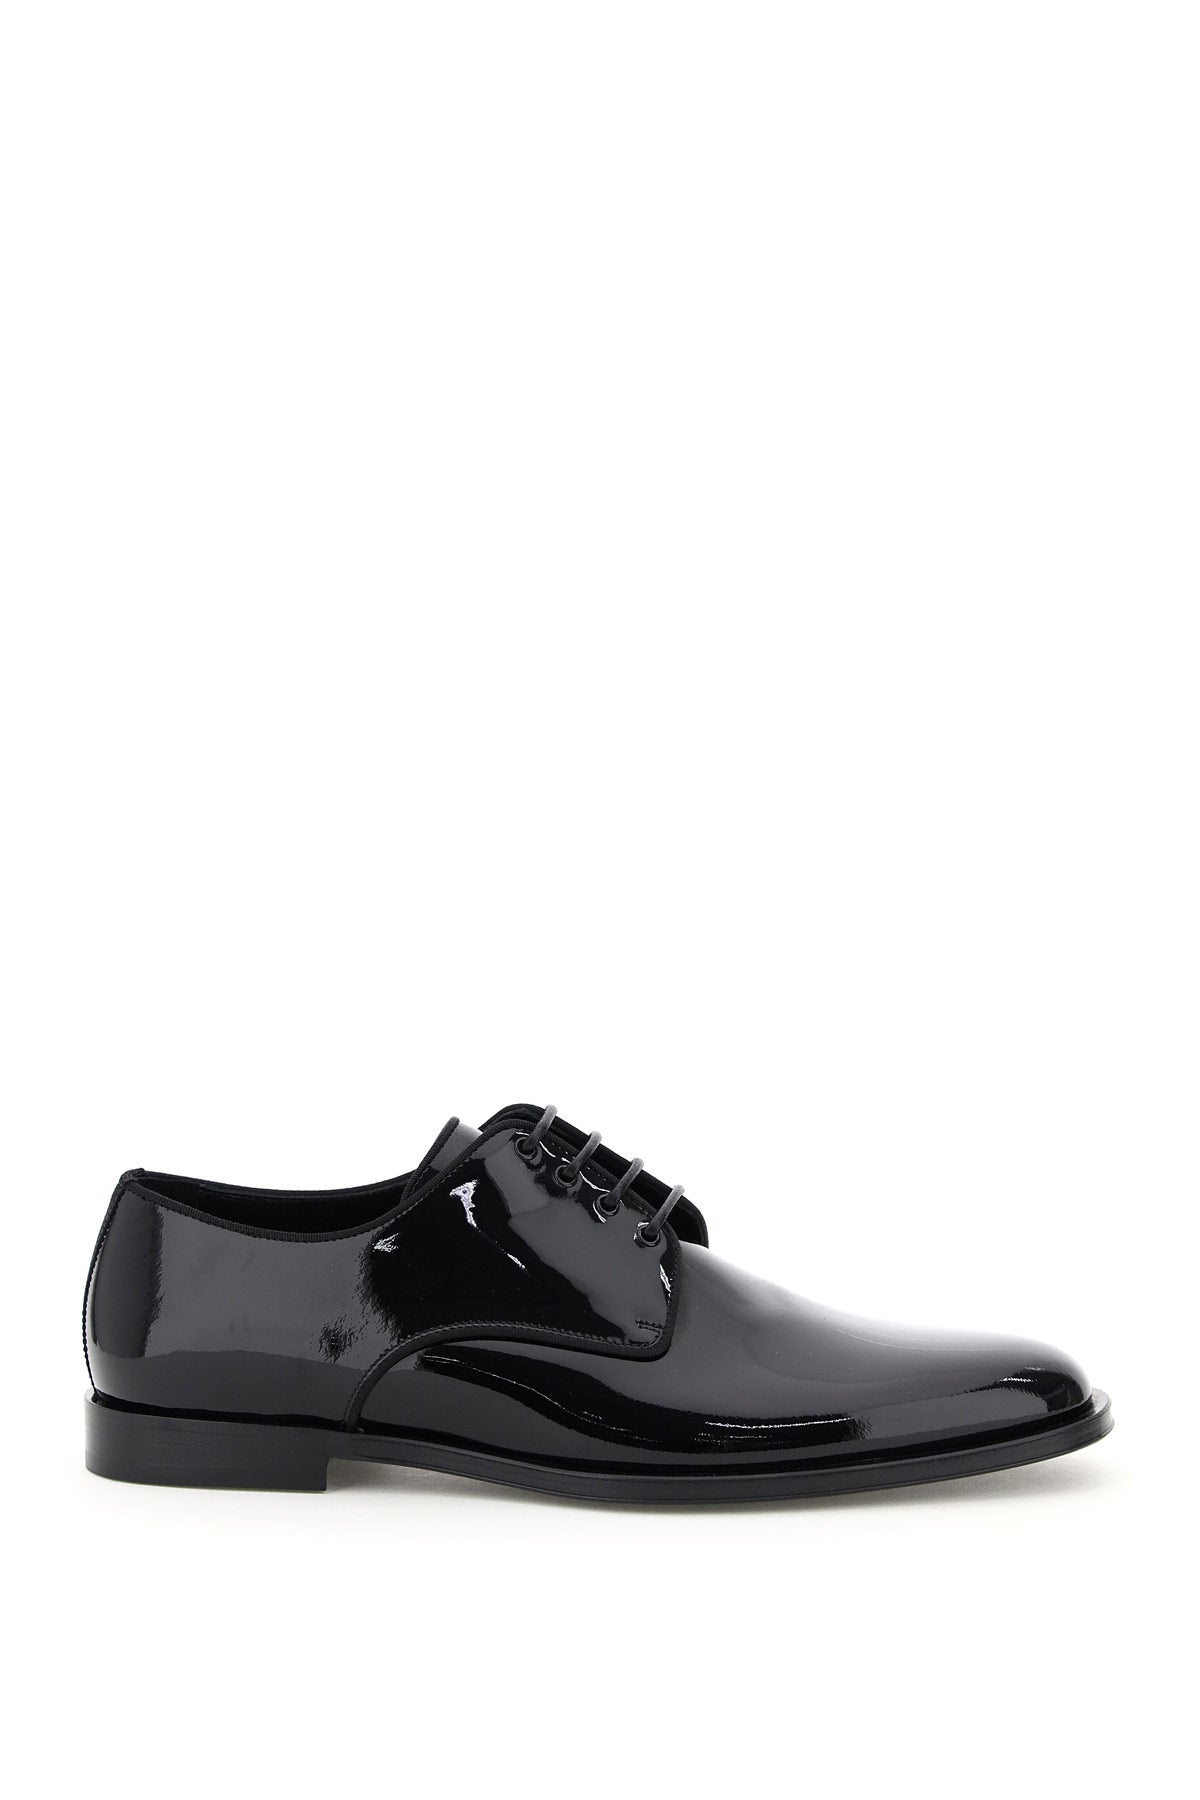 Dolce & gabbana patent leather lace-up shoes-0